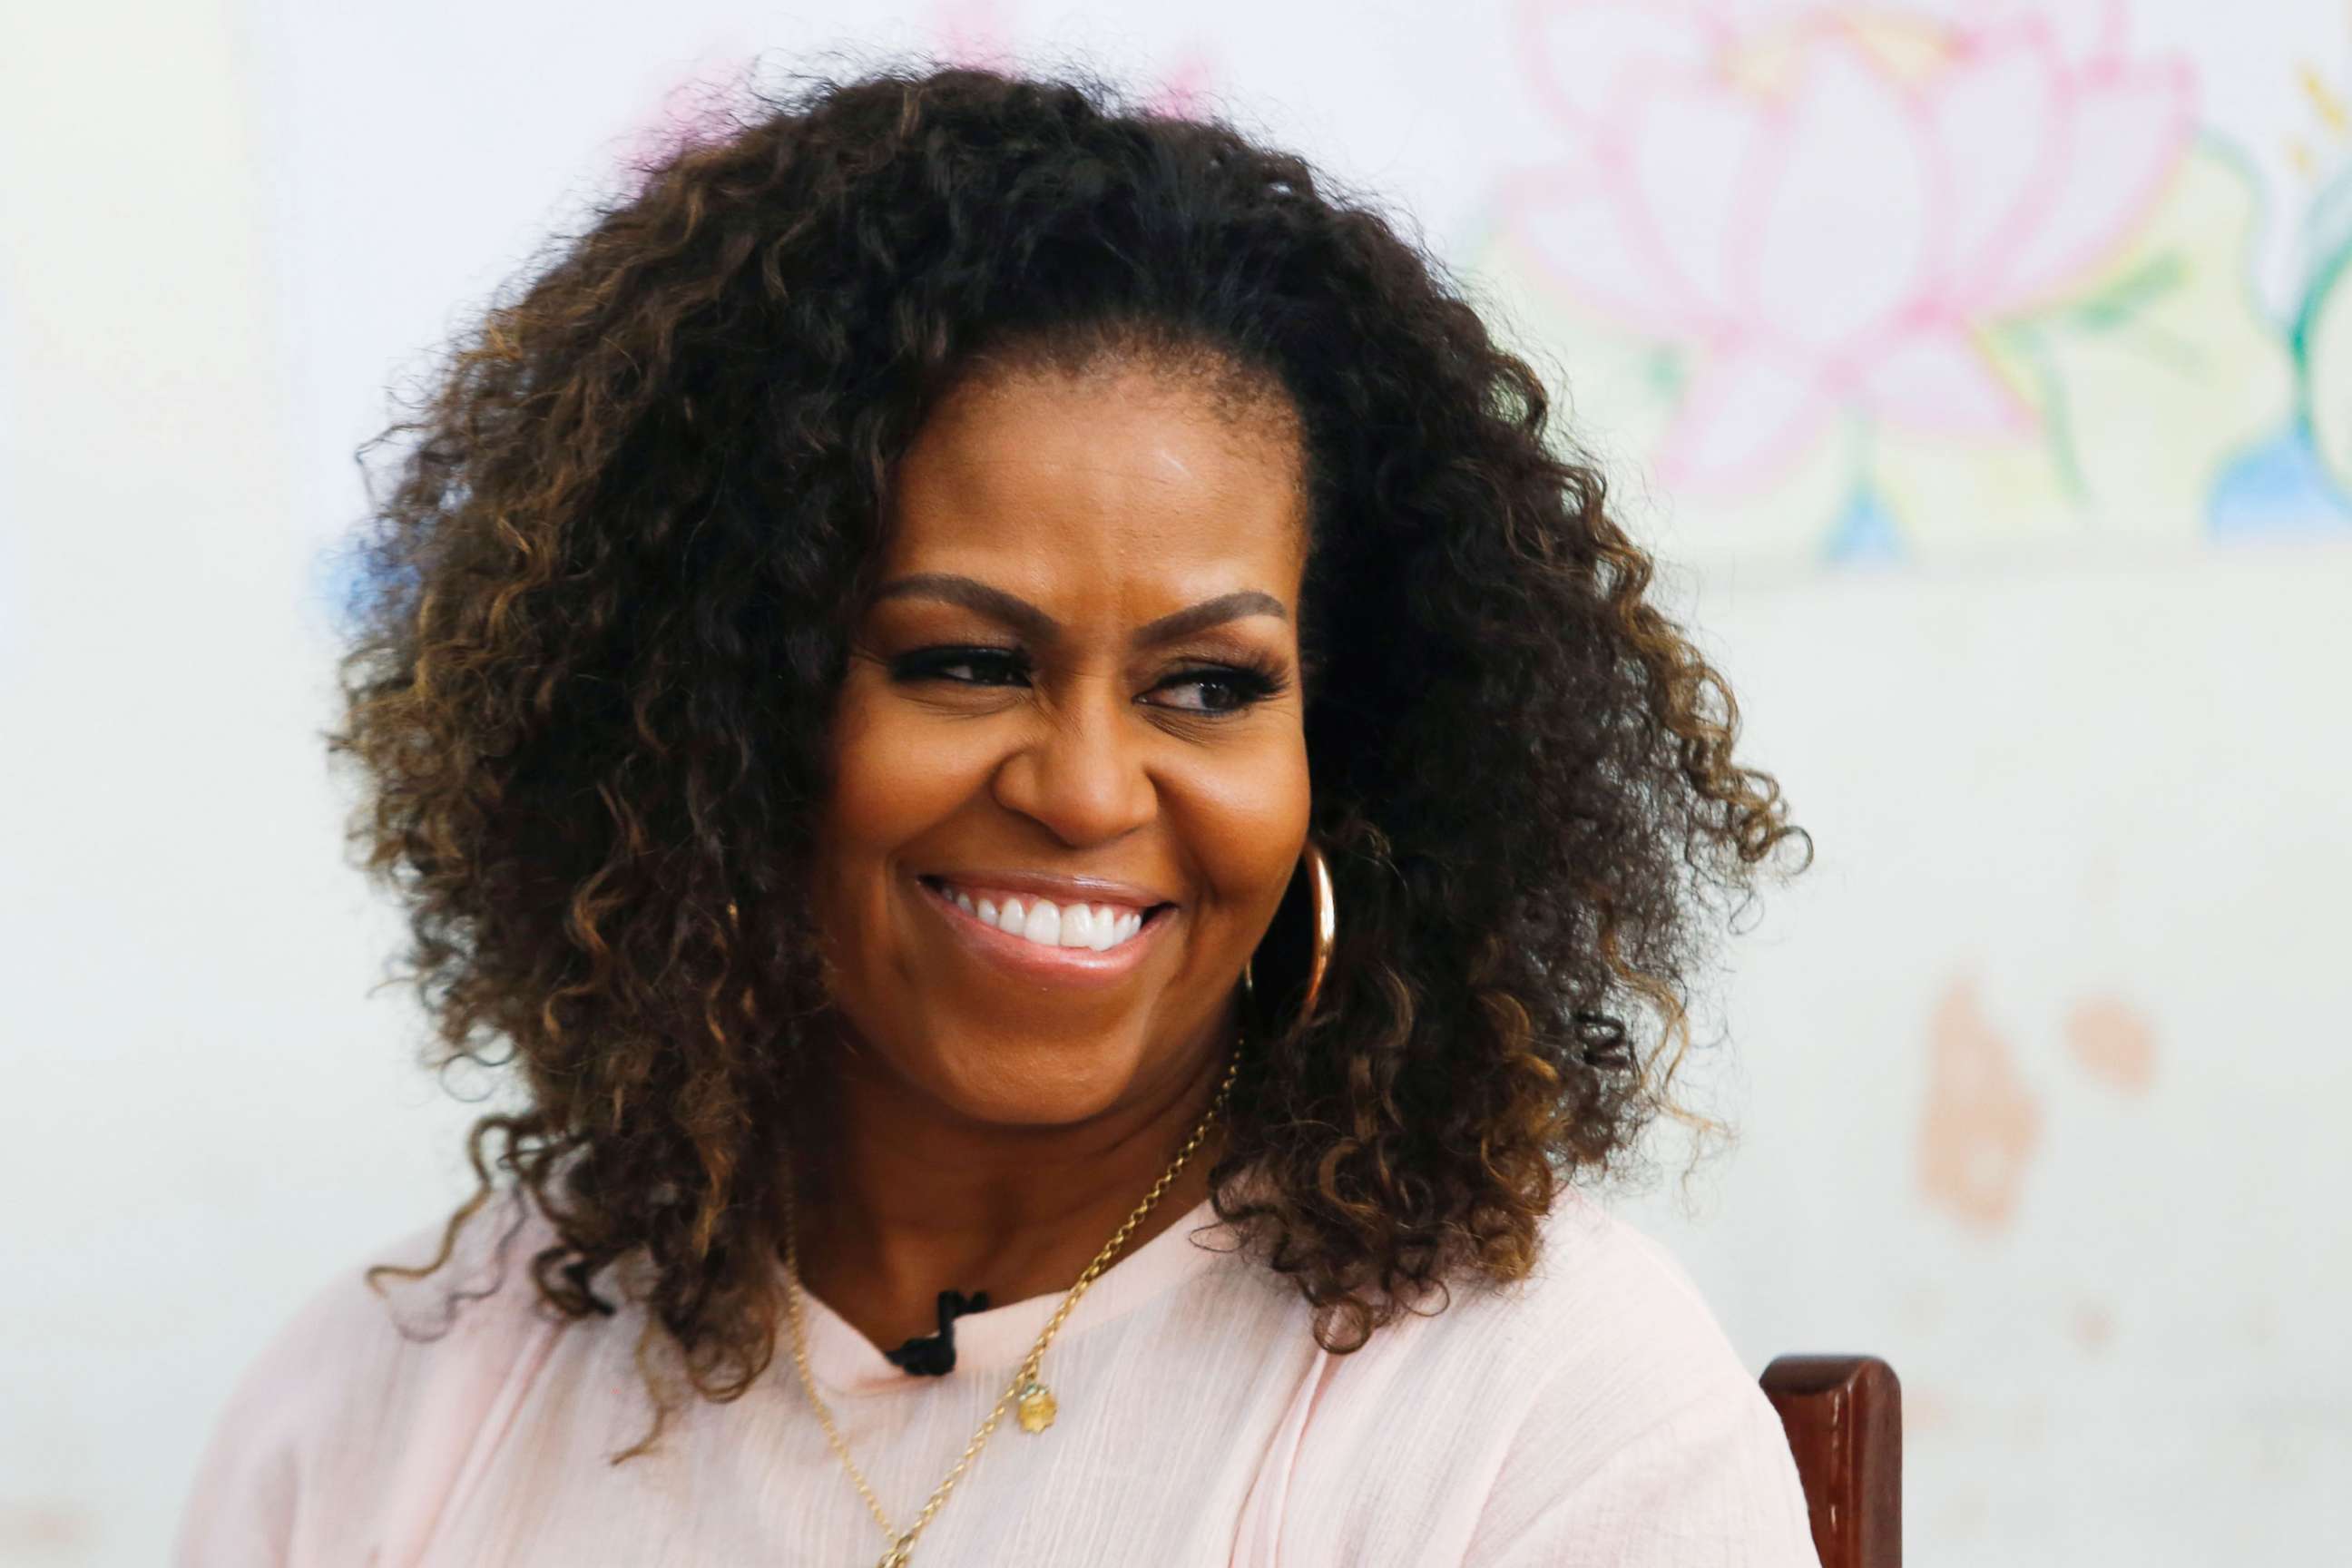 PHOTO: In this Dec. 9, 2019, file photo, former first lady Michelle Obama attends an event with Room to Read at a school in Long An province, Vietnam.